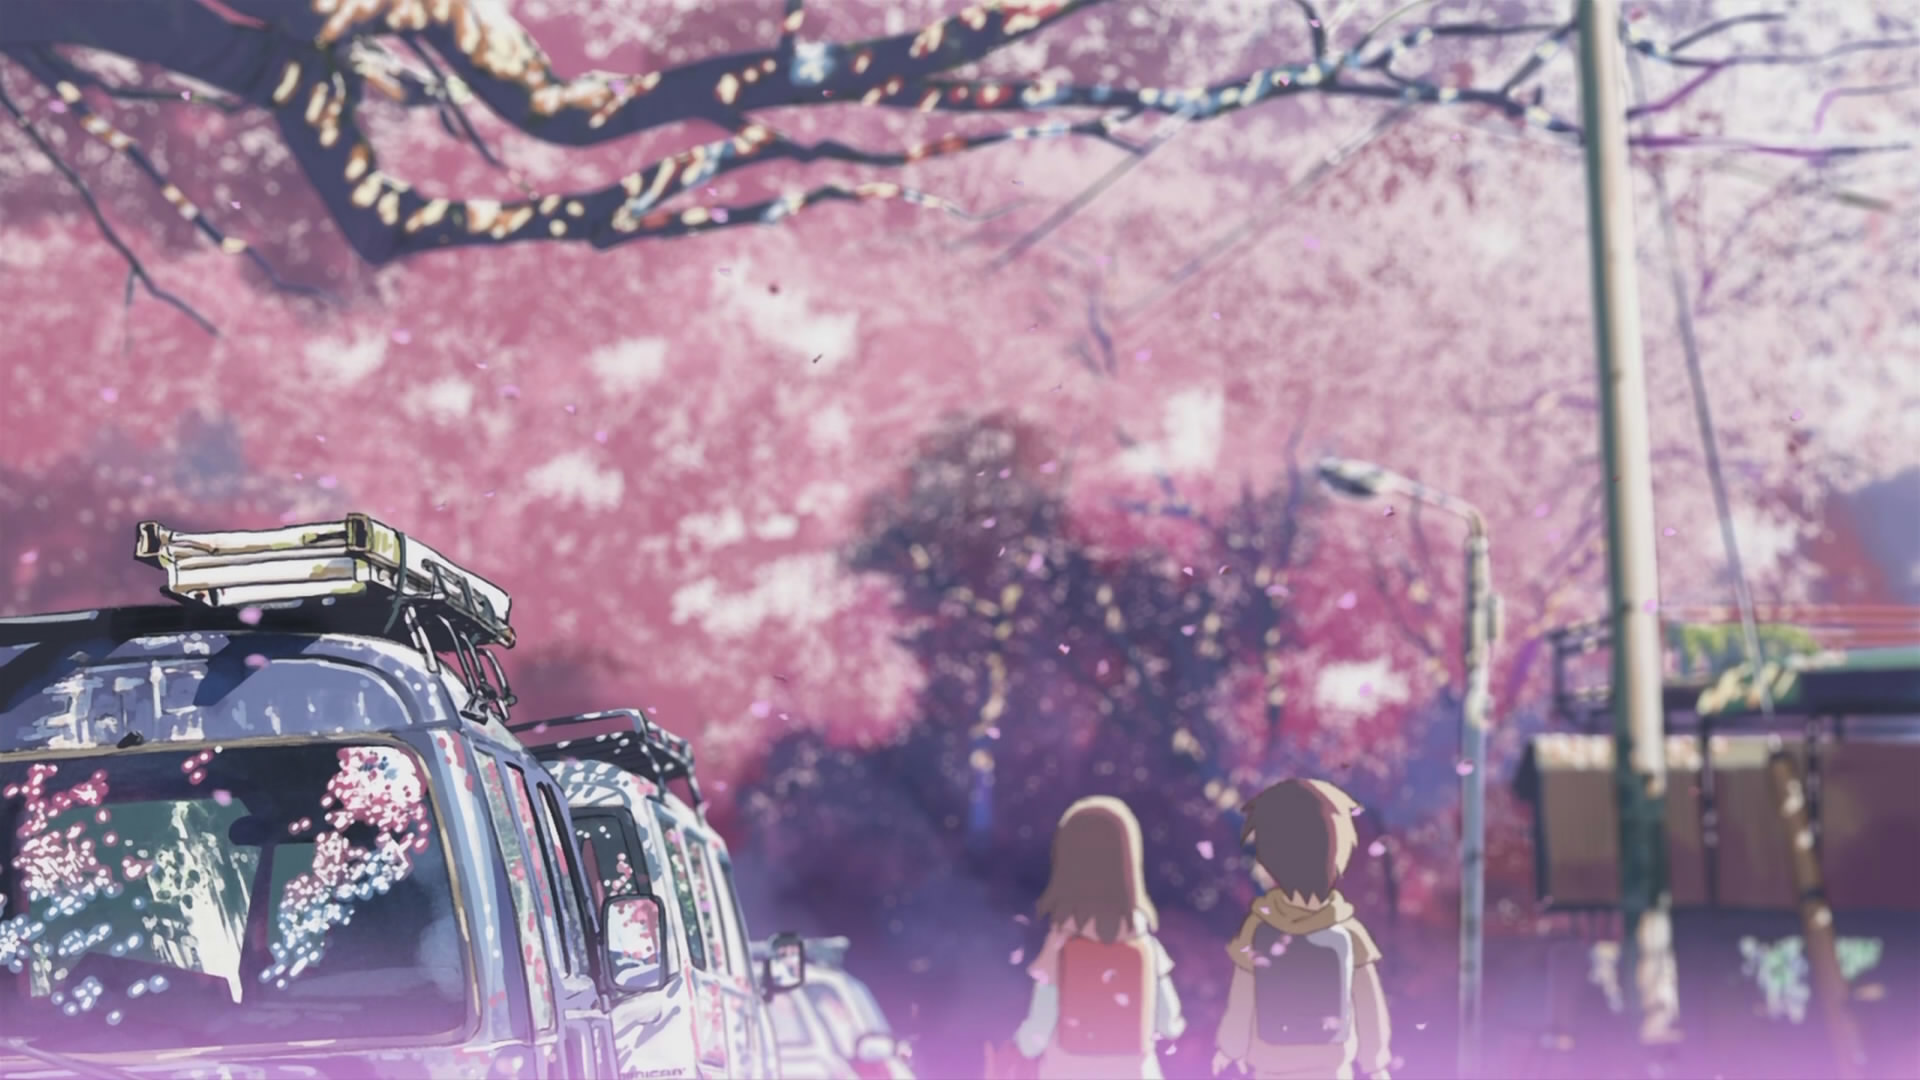 5 Centimeters Per Second Cherry Blossom Reflection Japanese Cars Backpacks Walking Pink Purple Stree 1920x1080